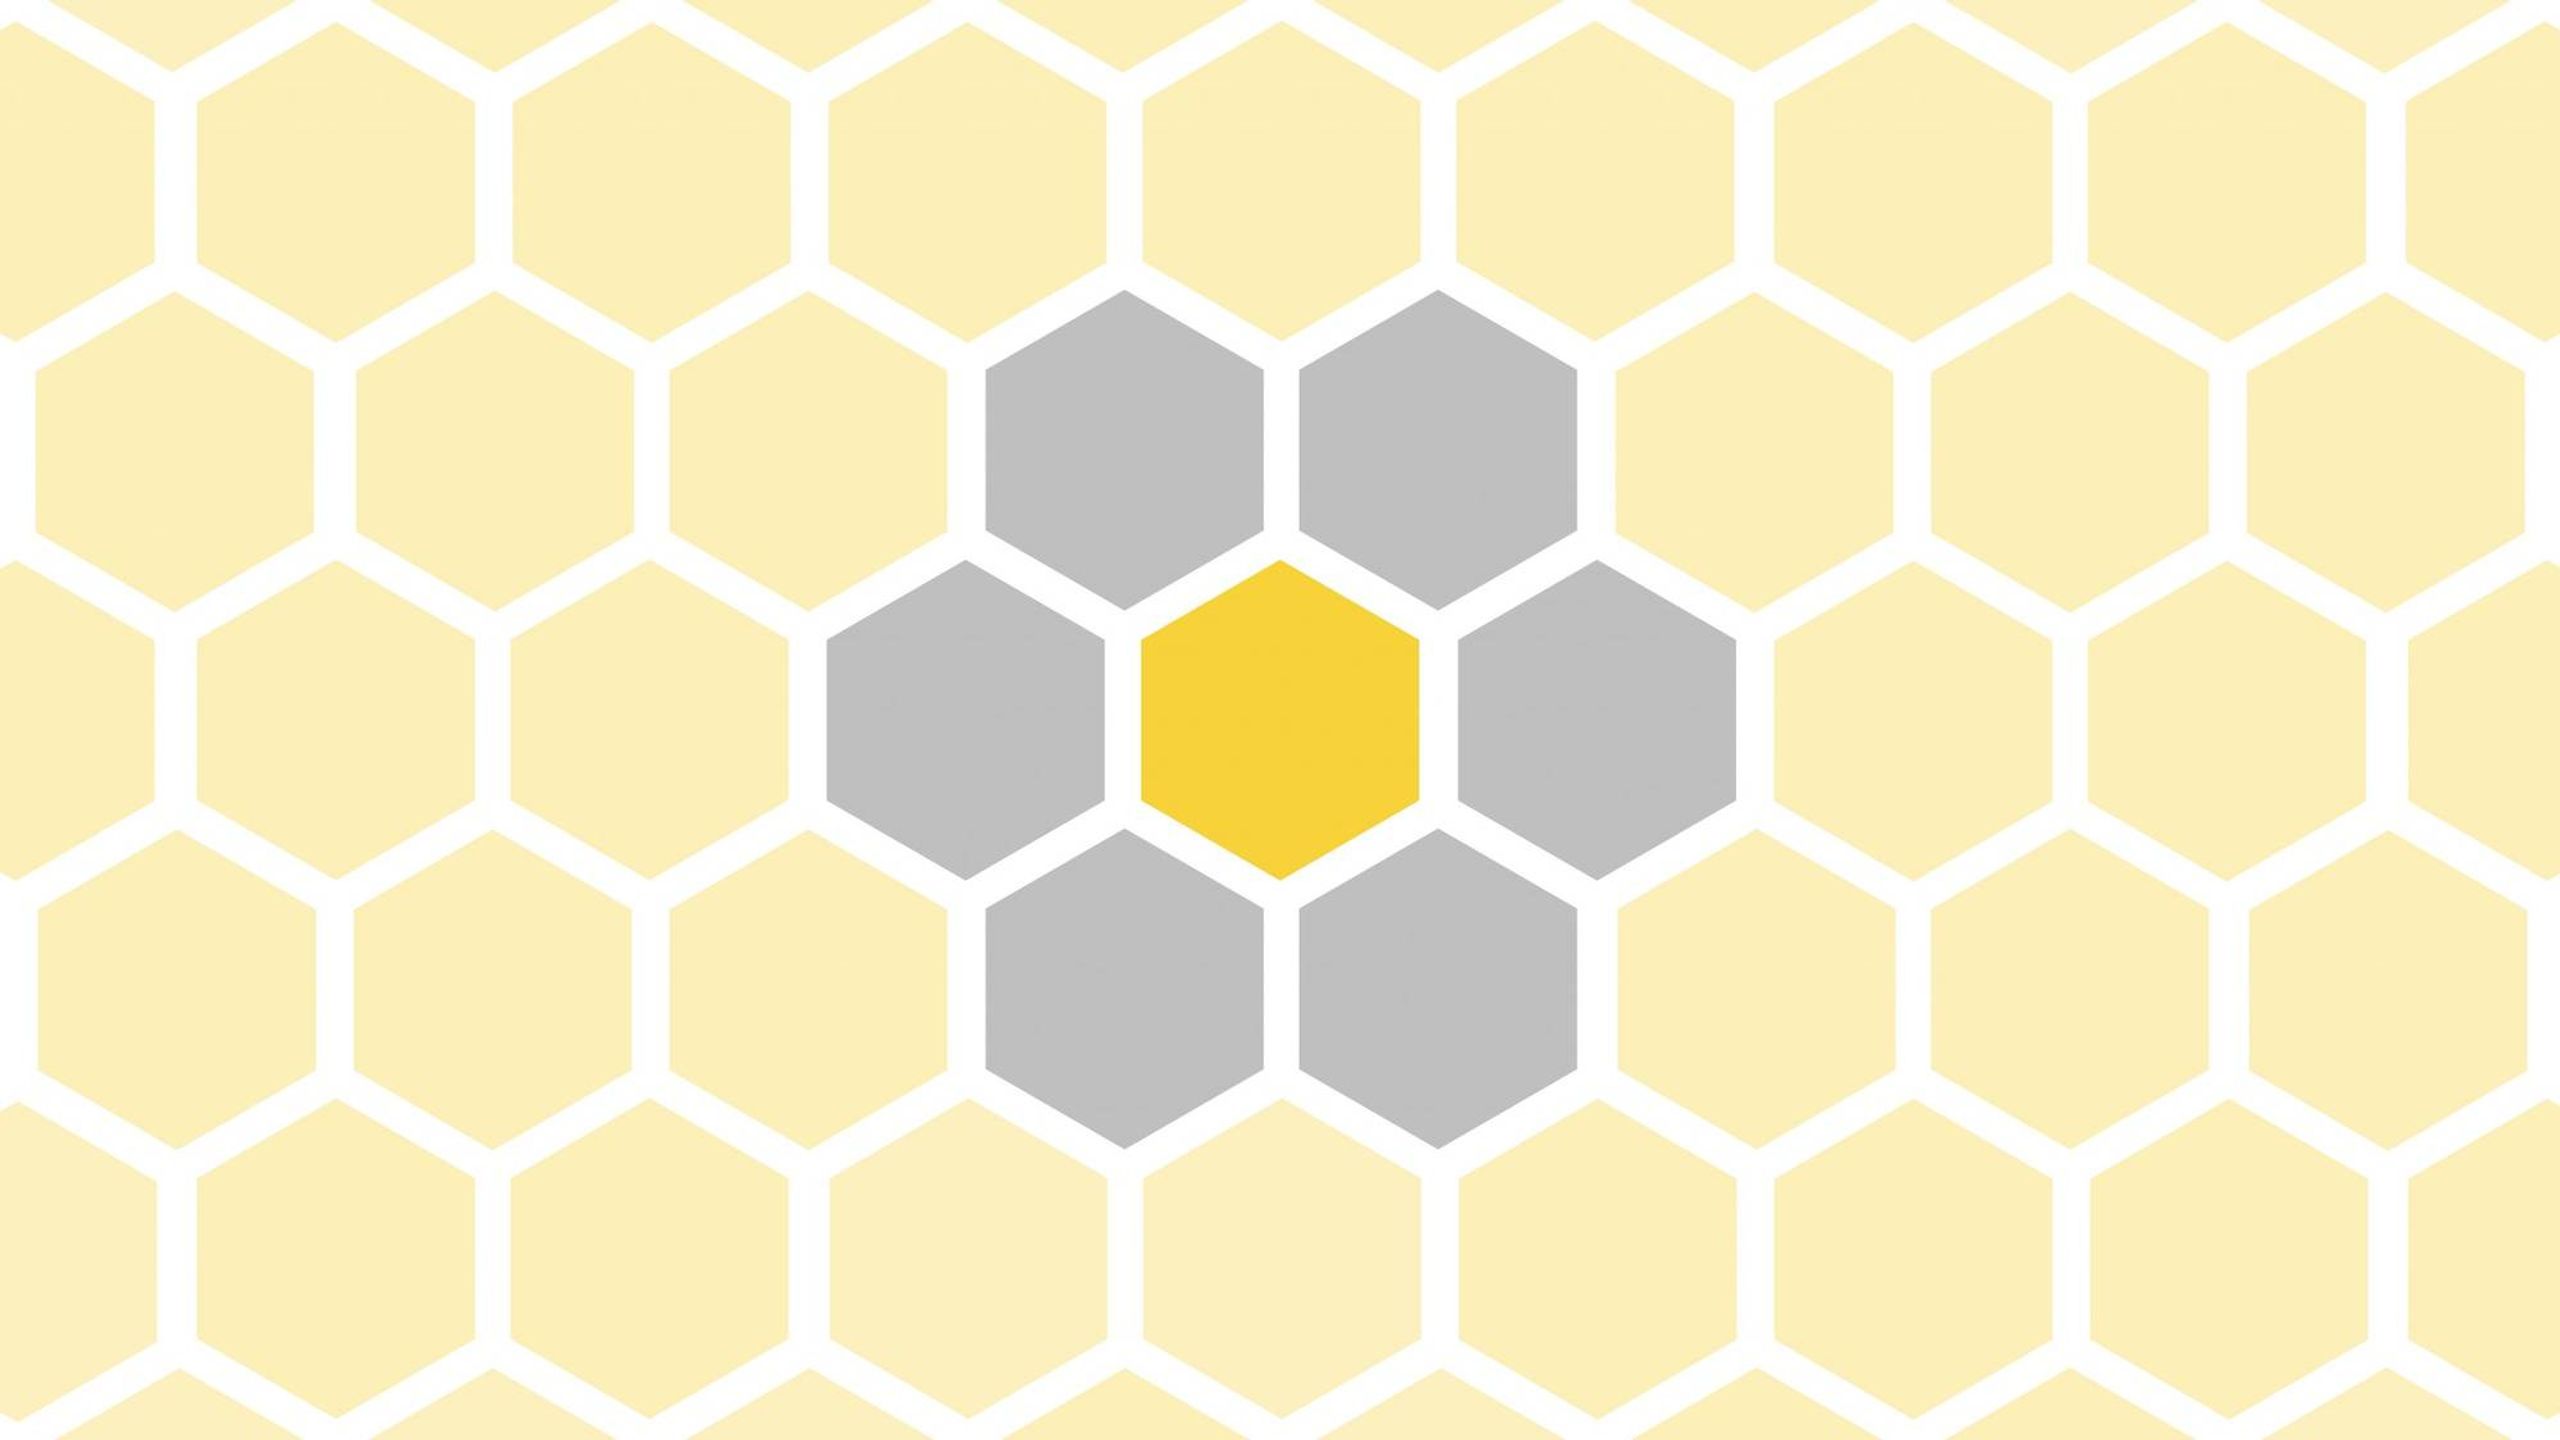 A repeated pattern of hexagonal shapes in a panagram style. Next Avenue, Spelling Bee Game, panagram